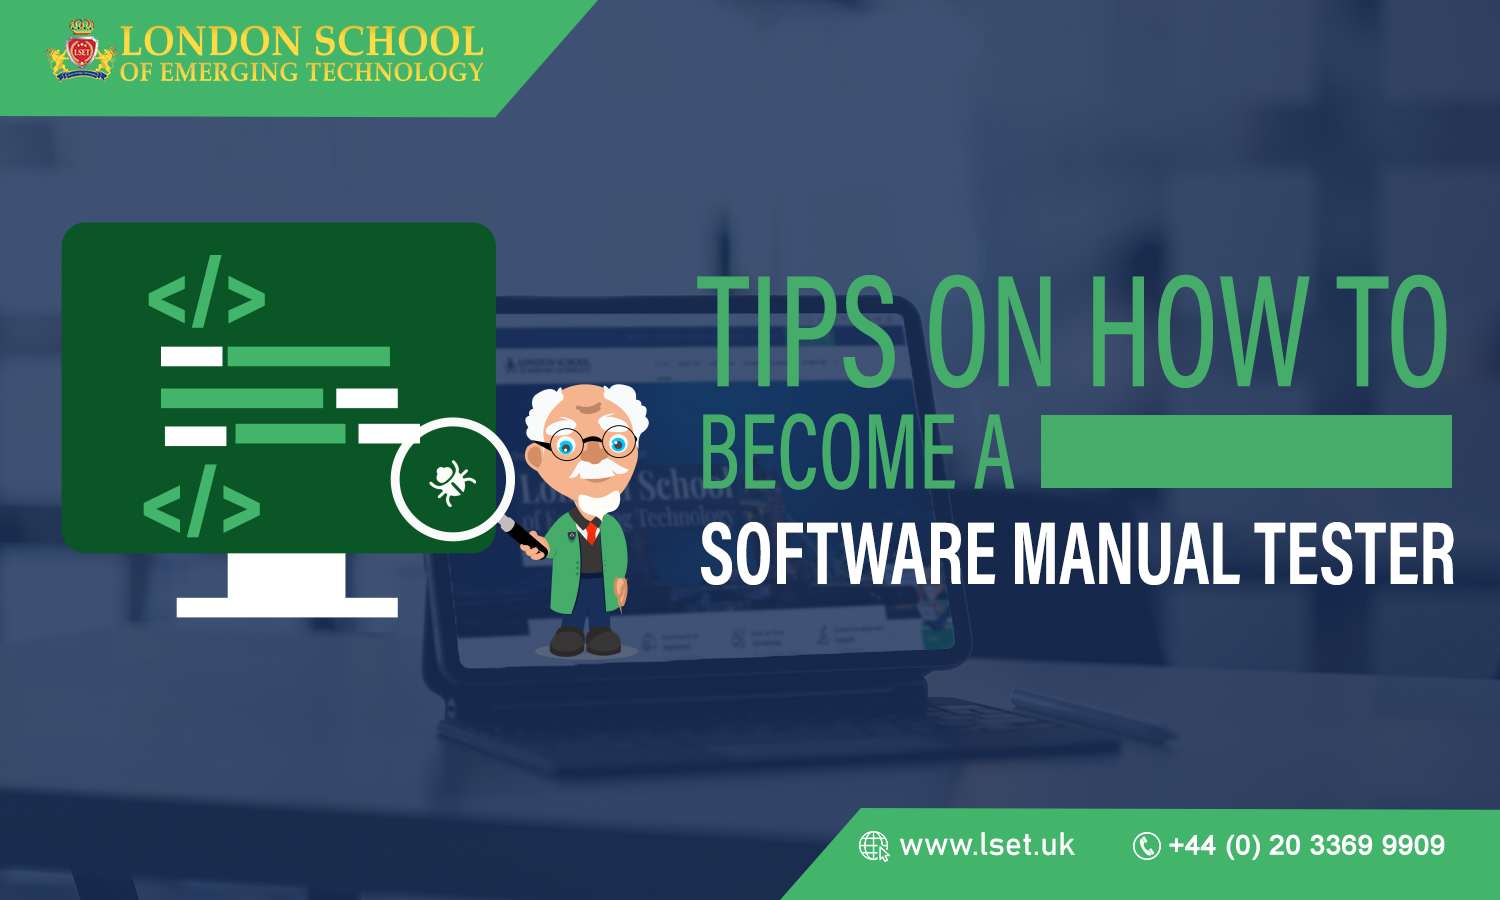 Tips on How to Become a Software Manual Tester